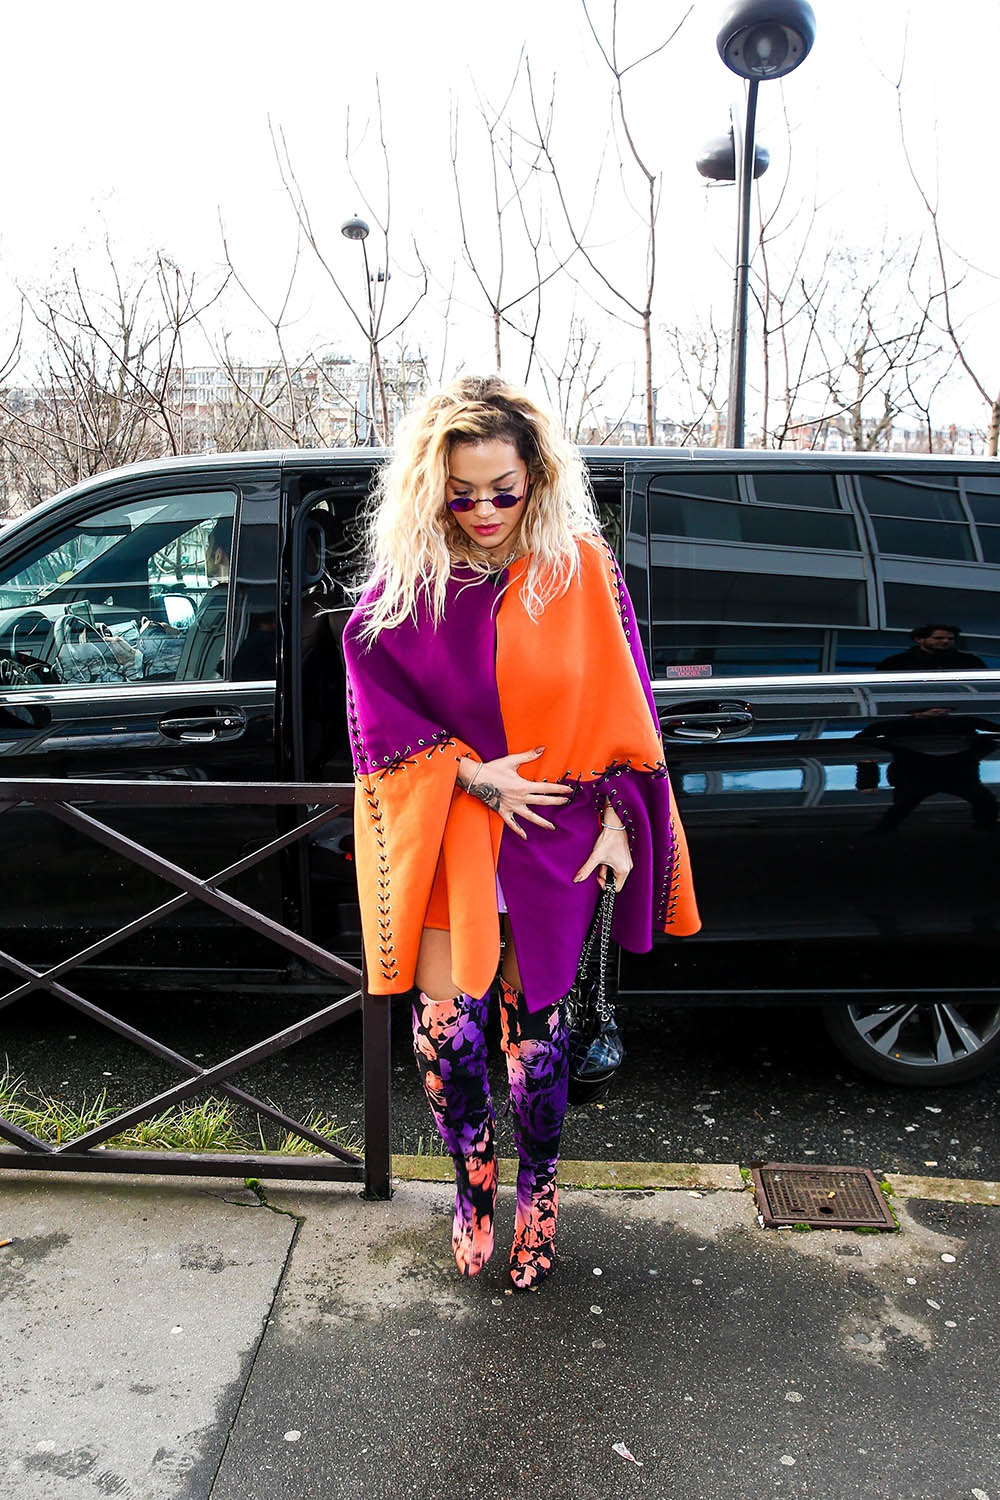 Rita Ora arrives at the Chanel store in Paris